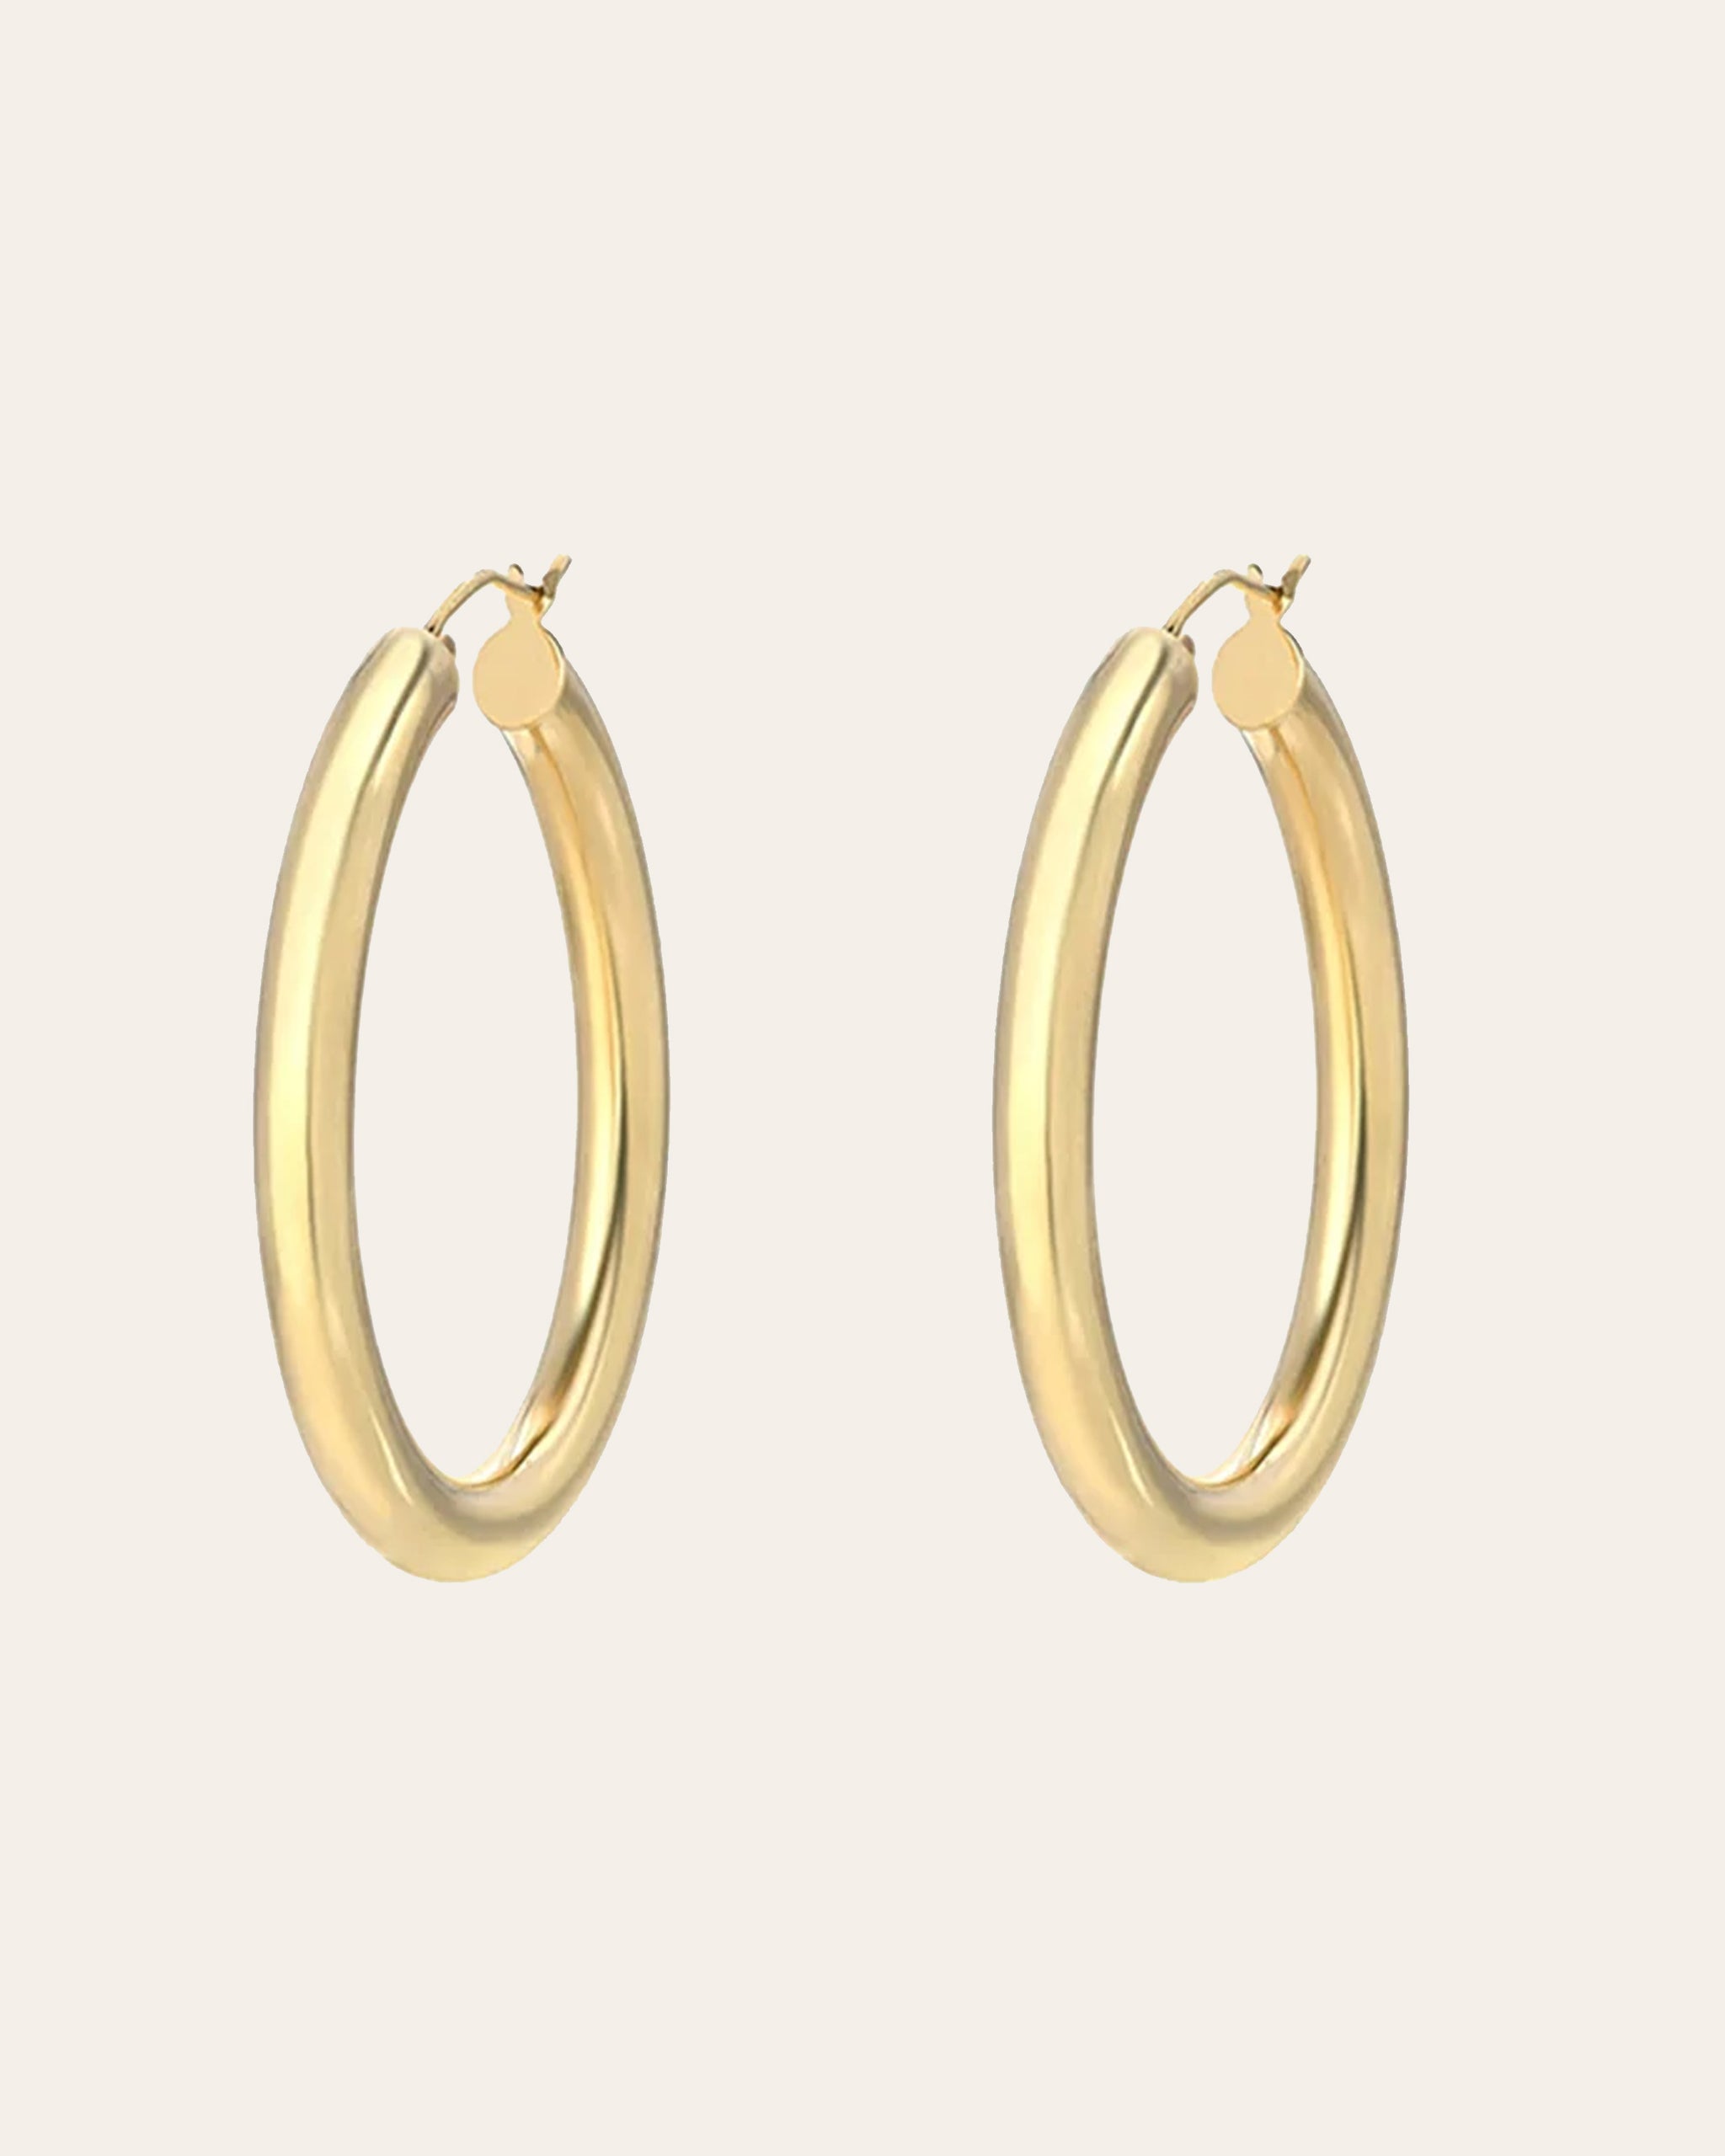 Large thick hoop earrings made of stainless steel | KNOCKNOK Fashion